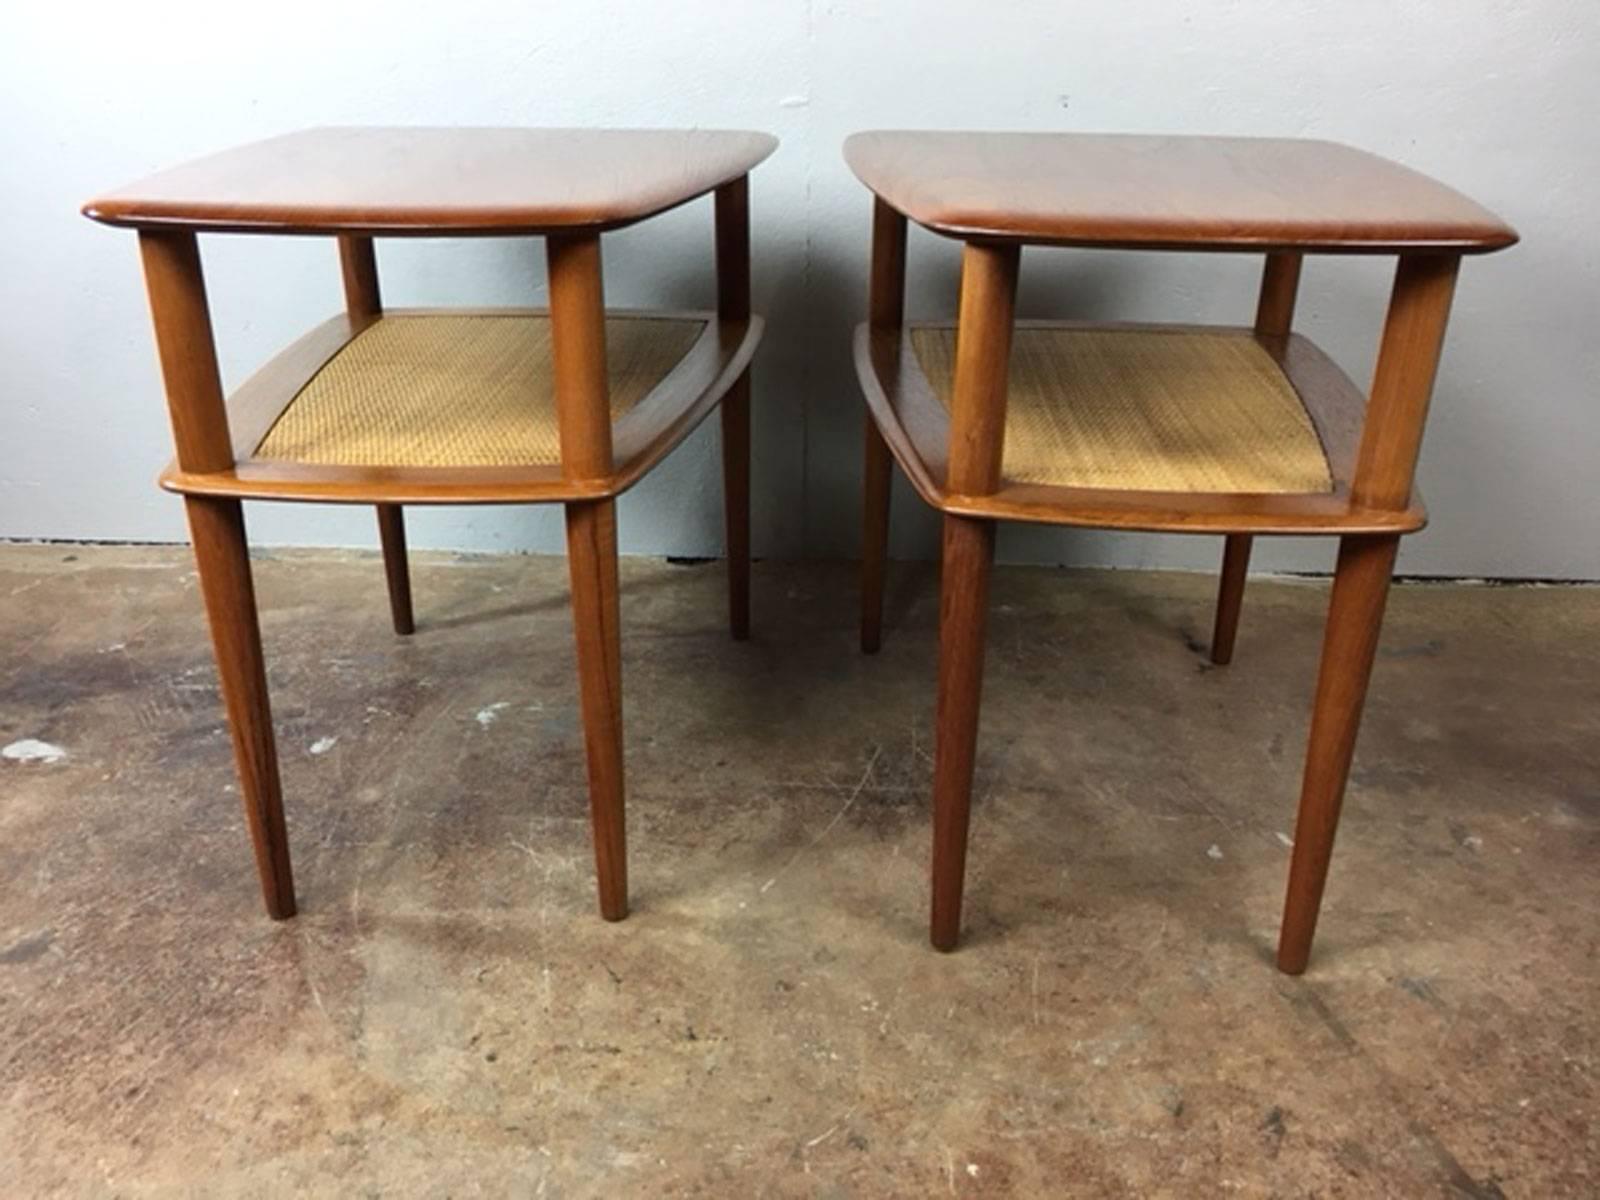 Solid teak end table pair designed by Peter Hvidt and Orla Mølgaard-Nielsen for France & Sons. The lower shelves retain their original caned inserts. Each piece includes the France & Sons manufacturing tag.